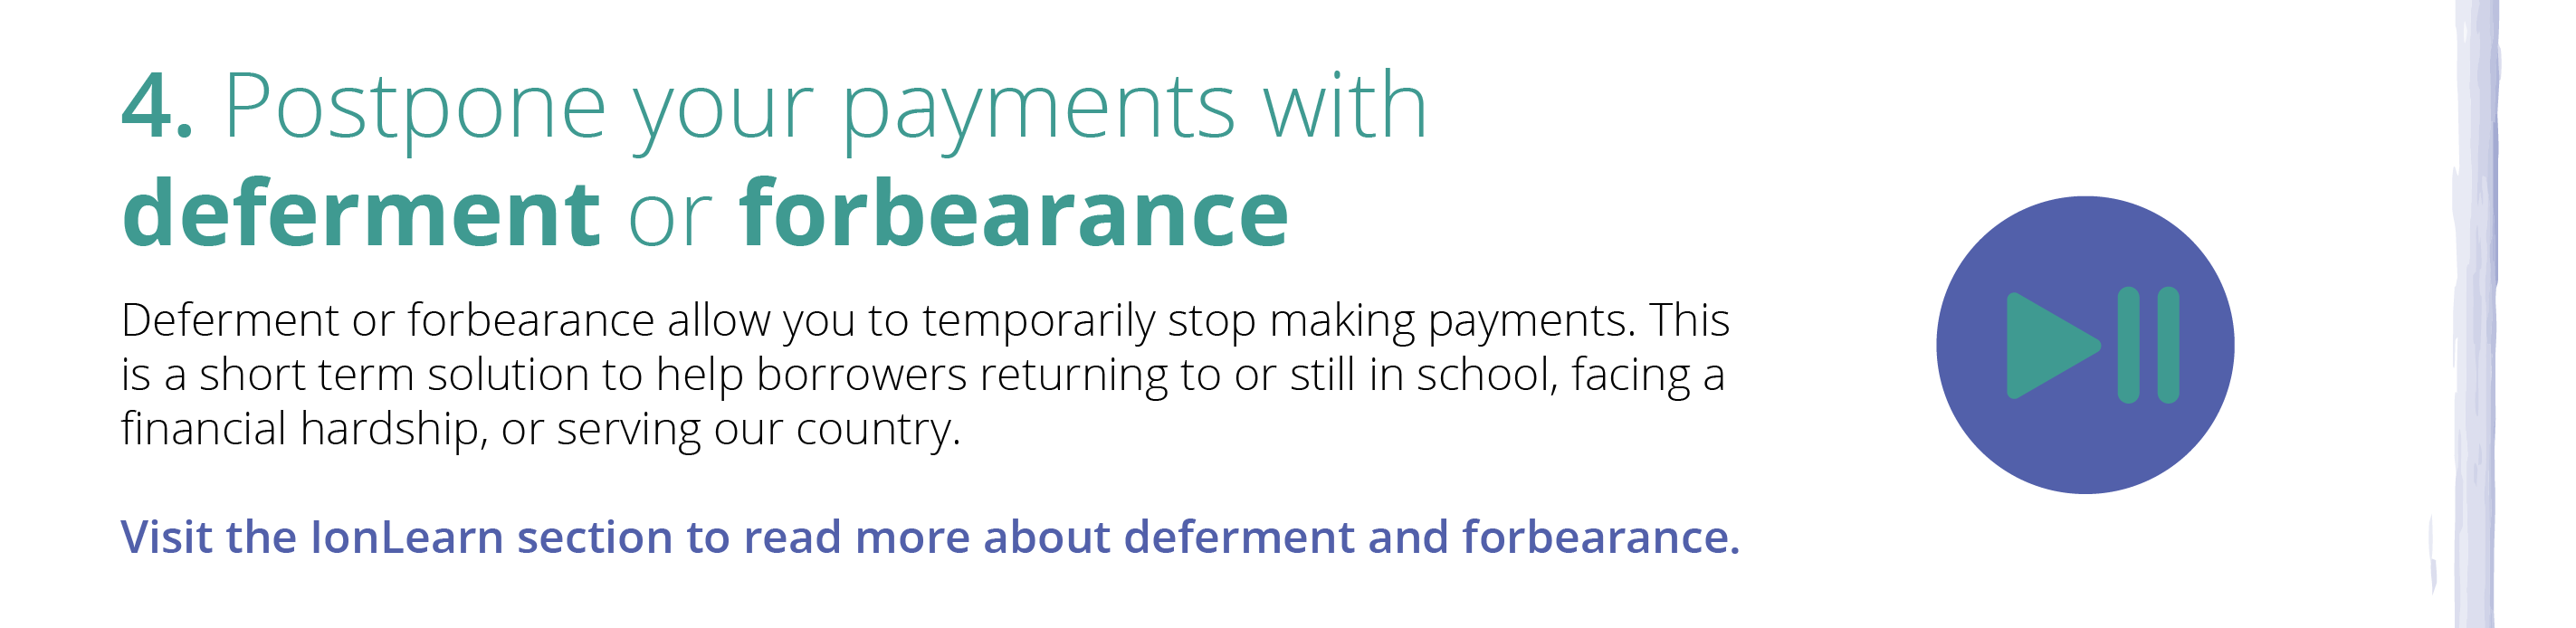 student loan payments deferment or forbearance